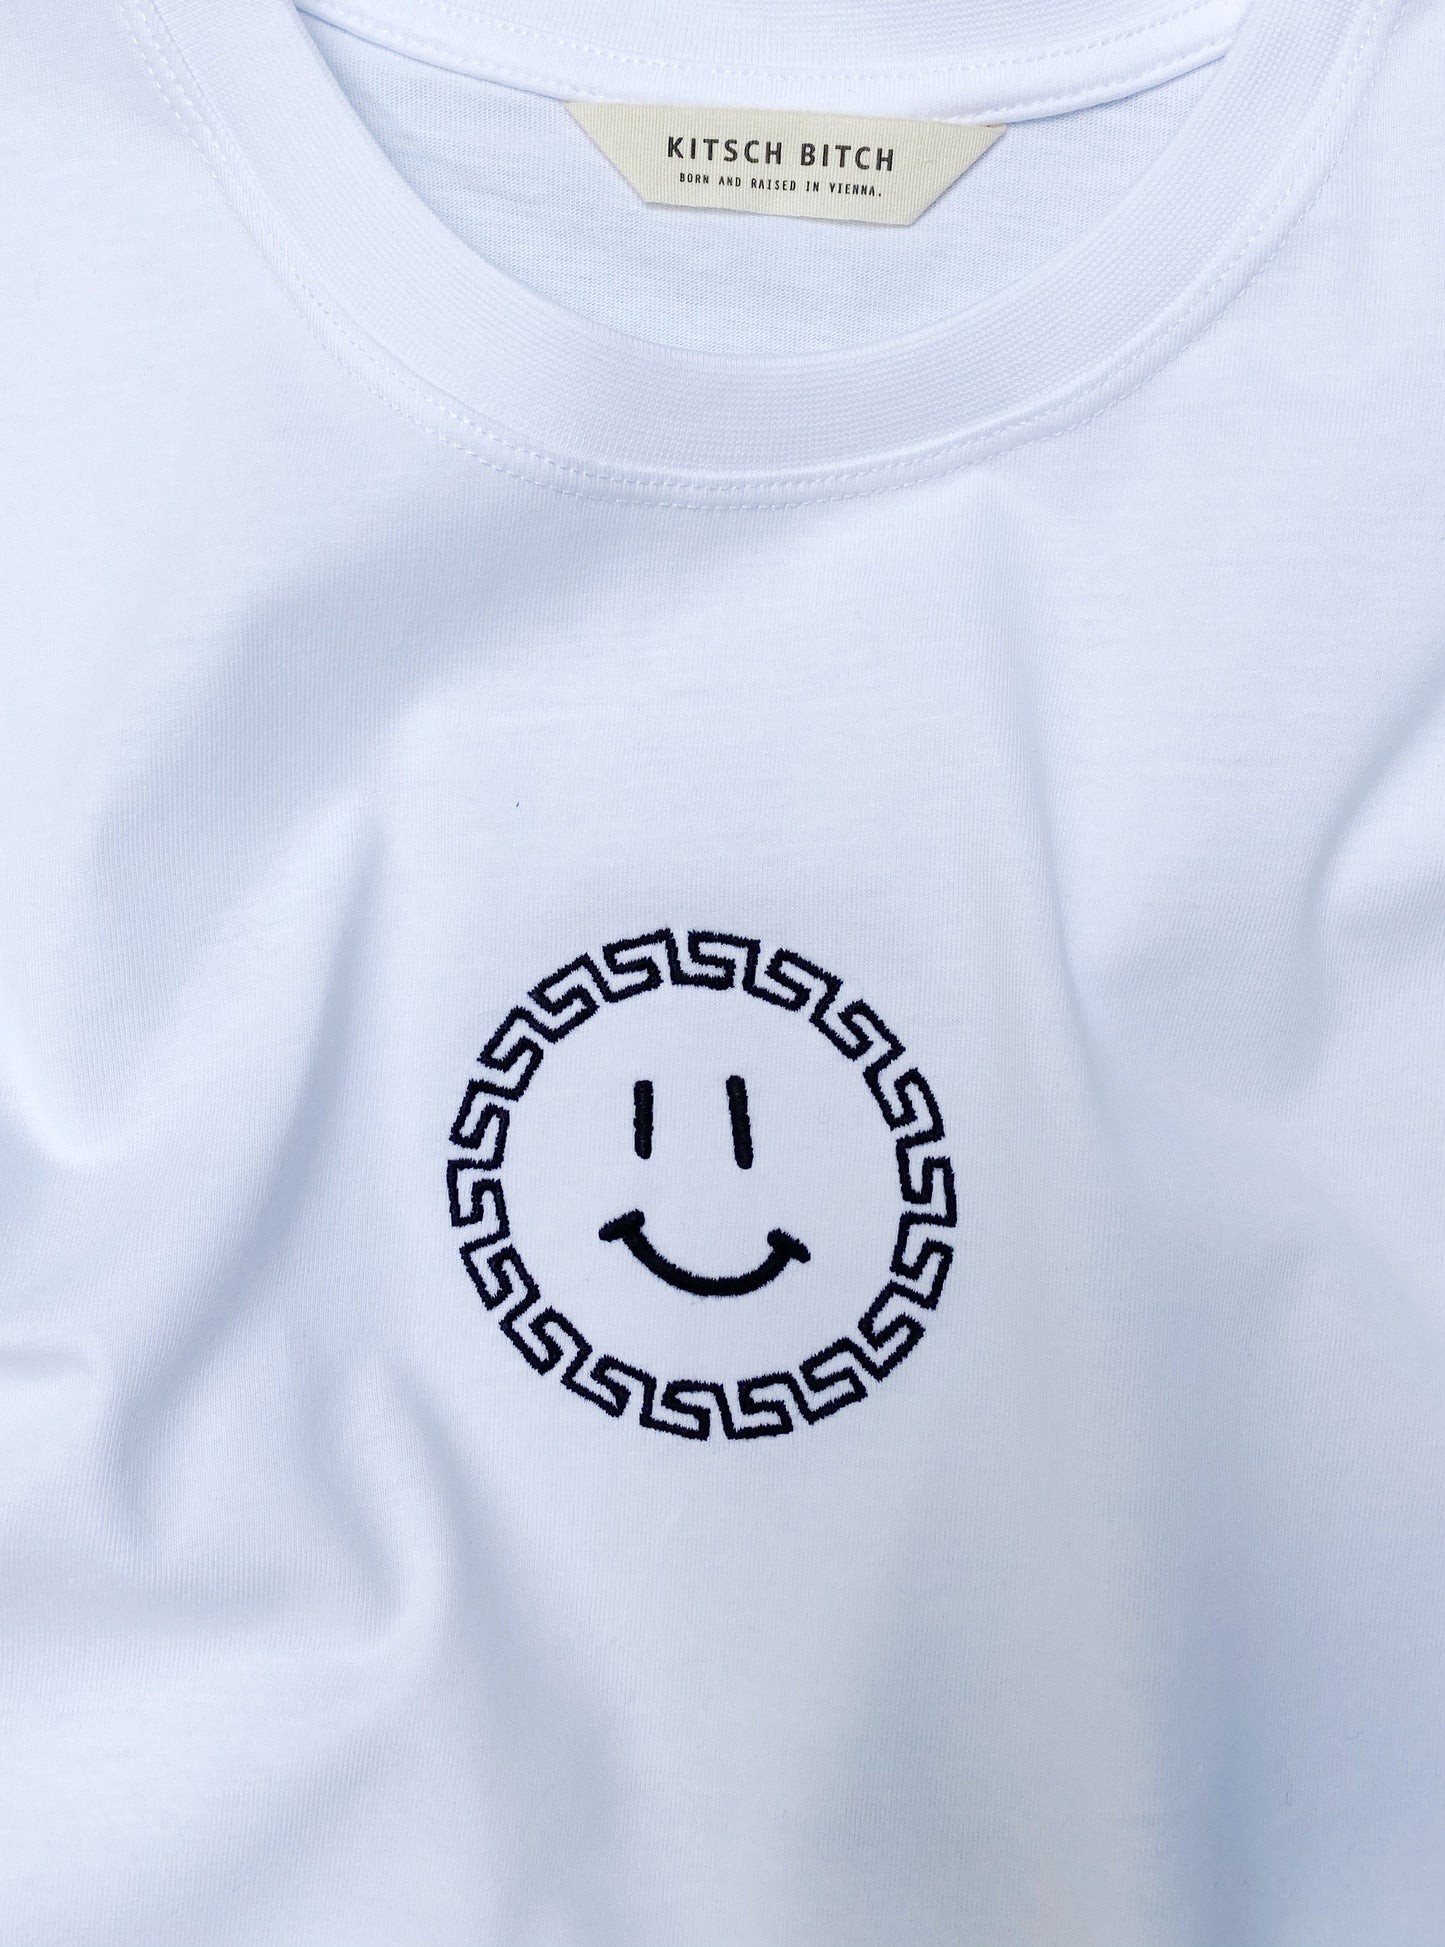 KITSCH BITCH Smiley Embroidery Unisex T-Shirt